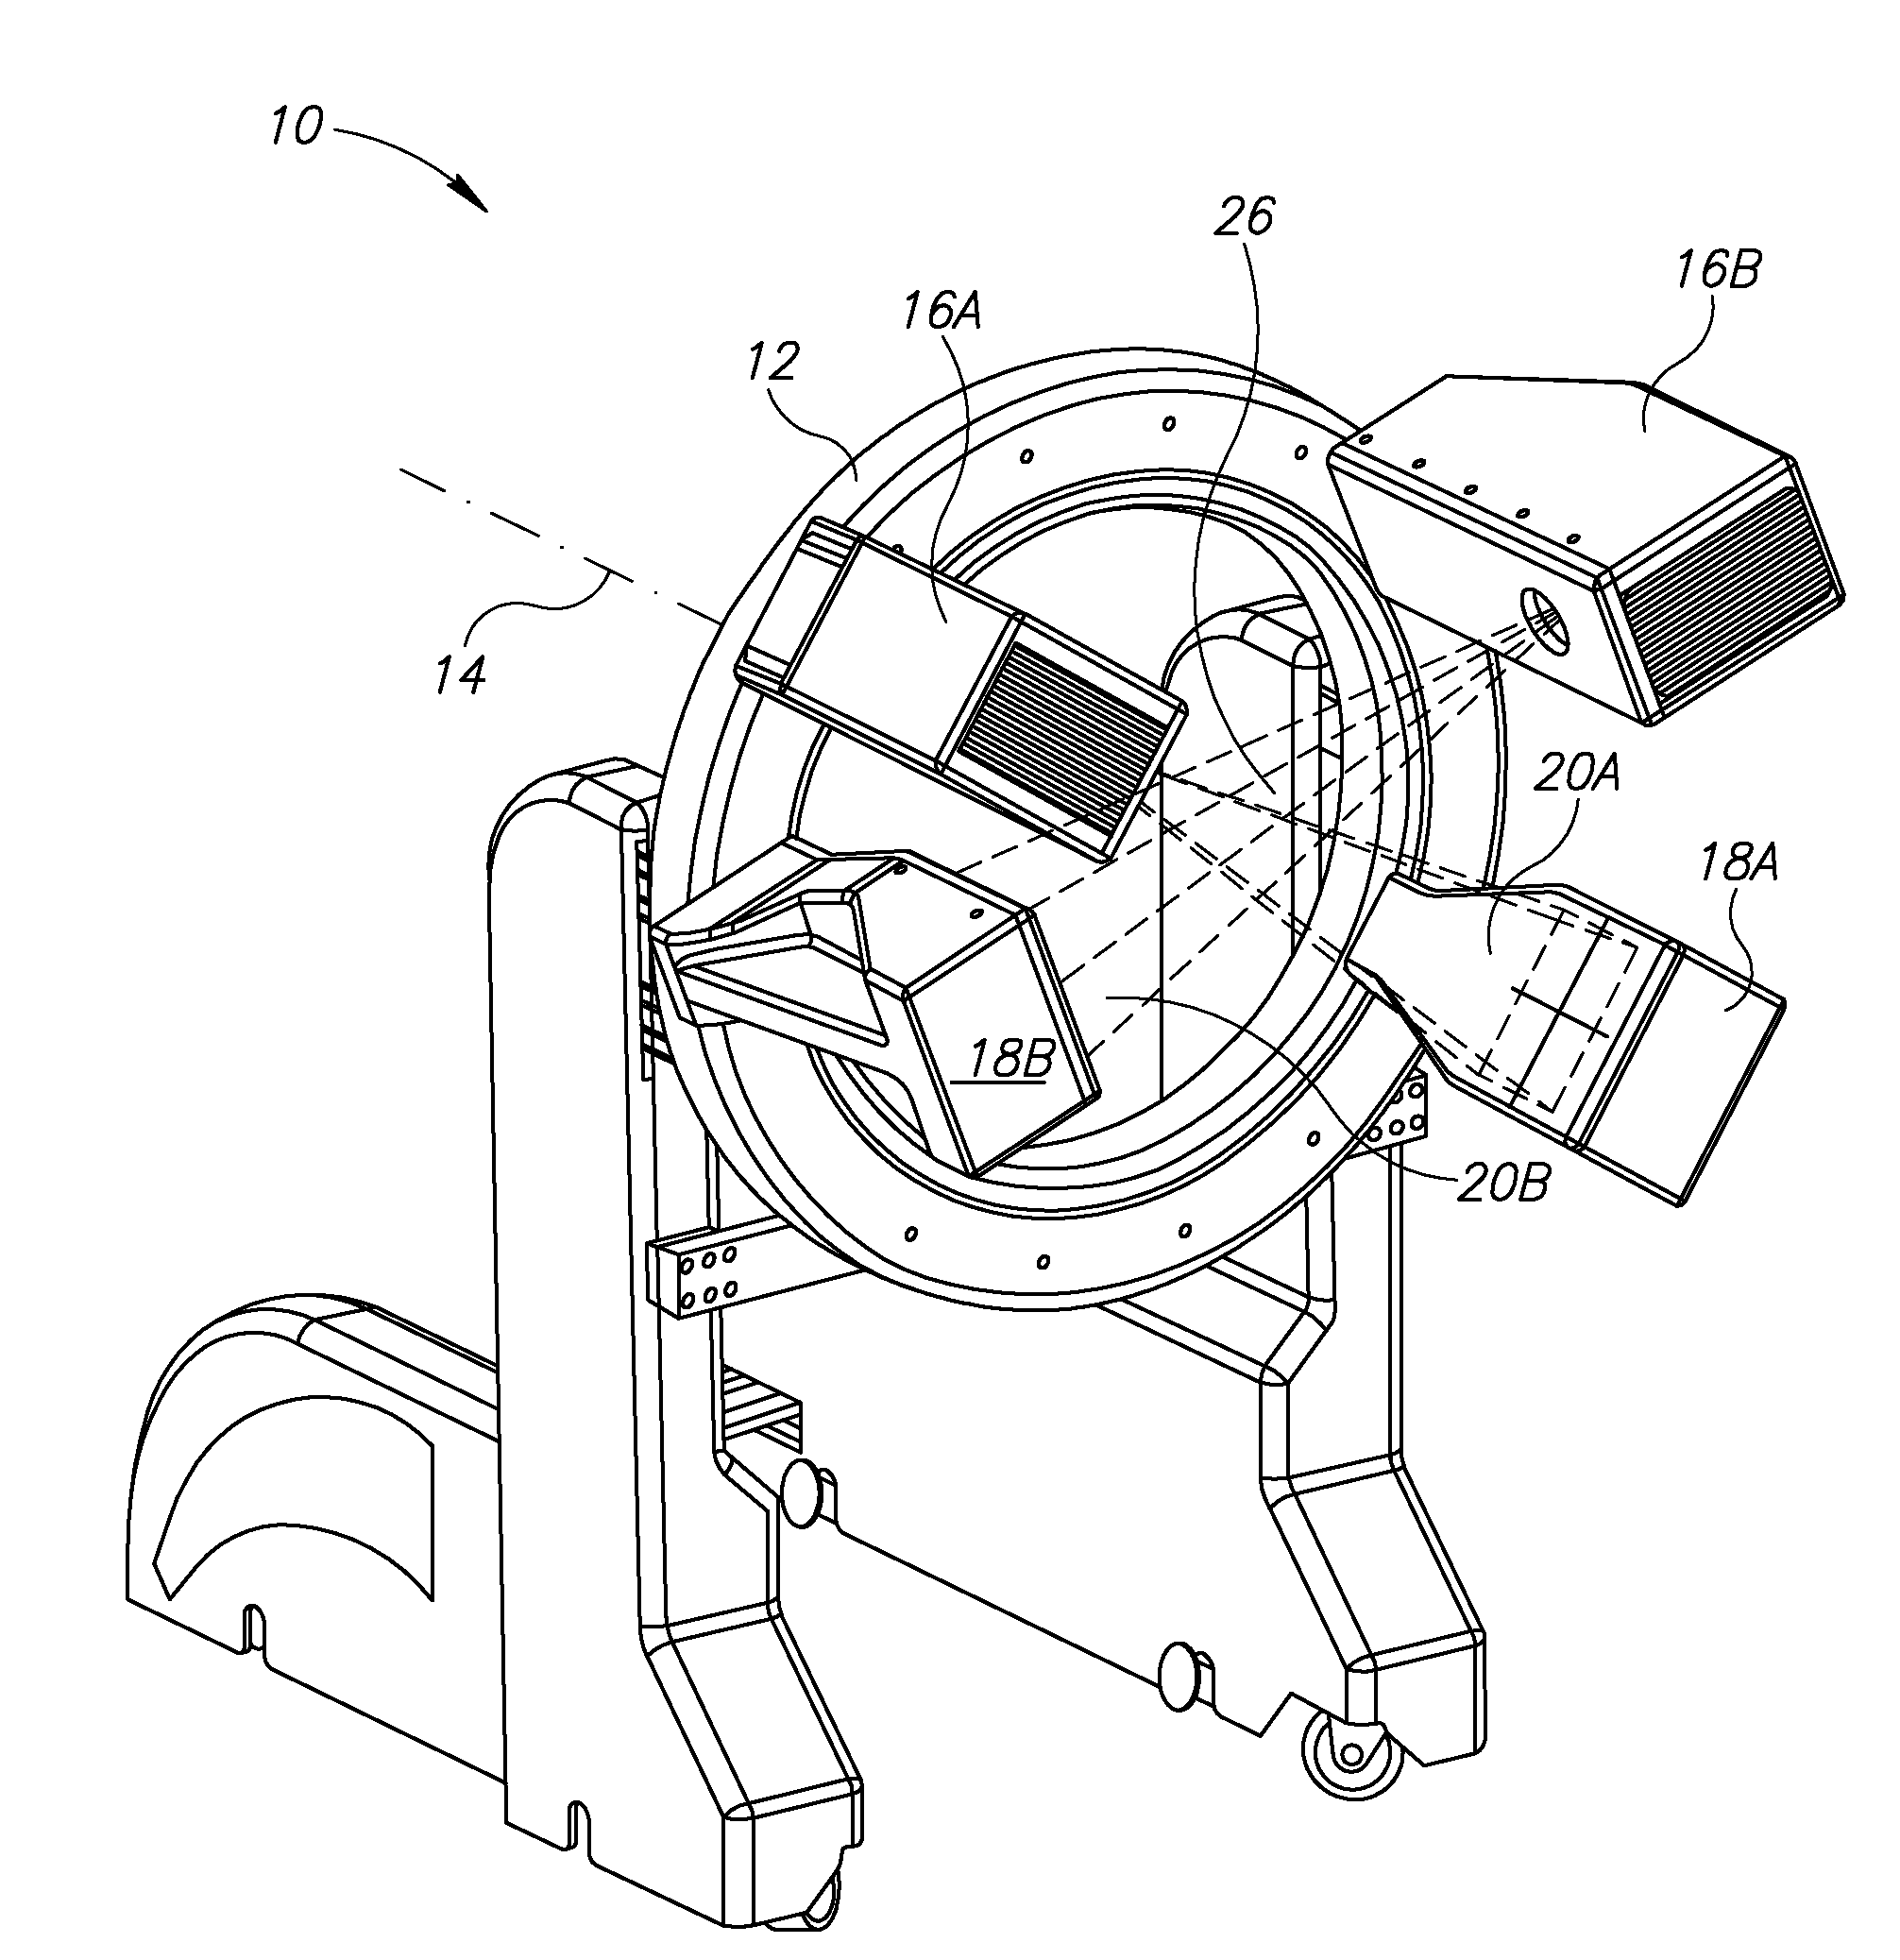 Ct scanning system with interlapping beams